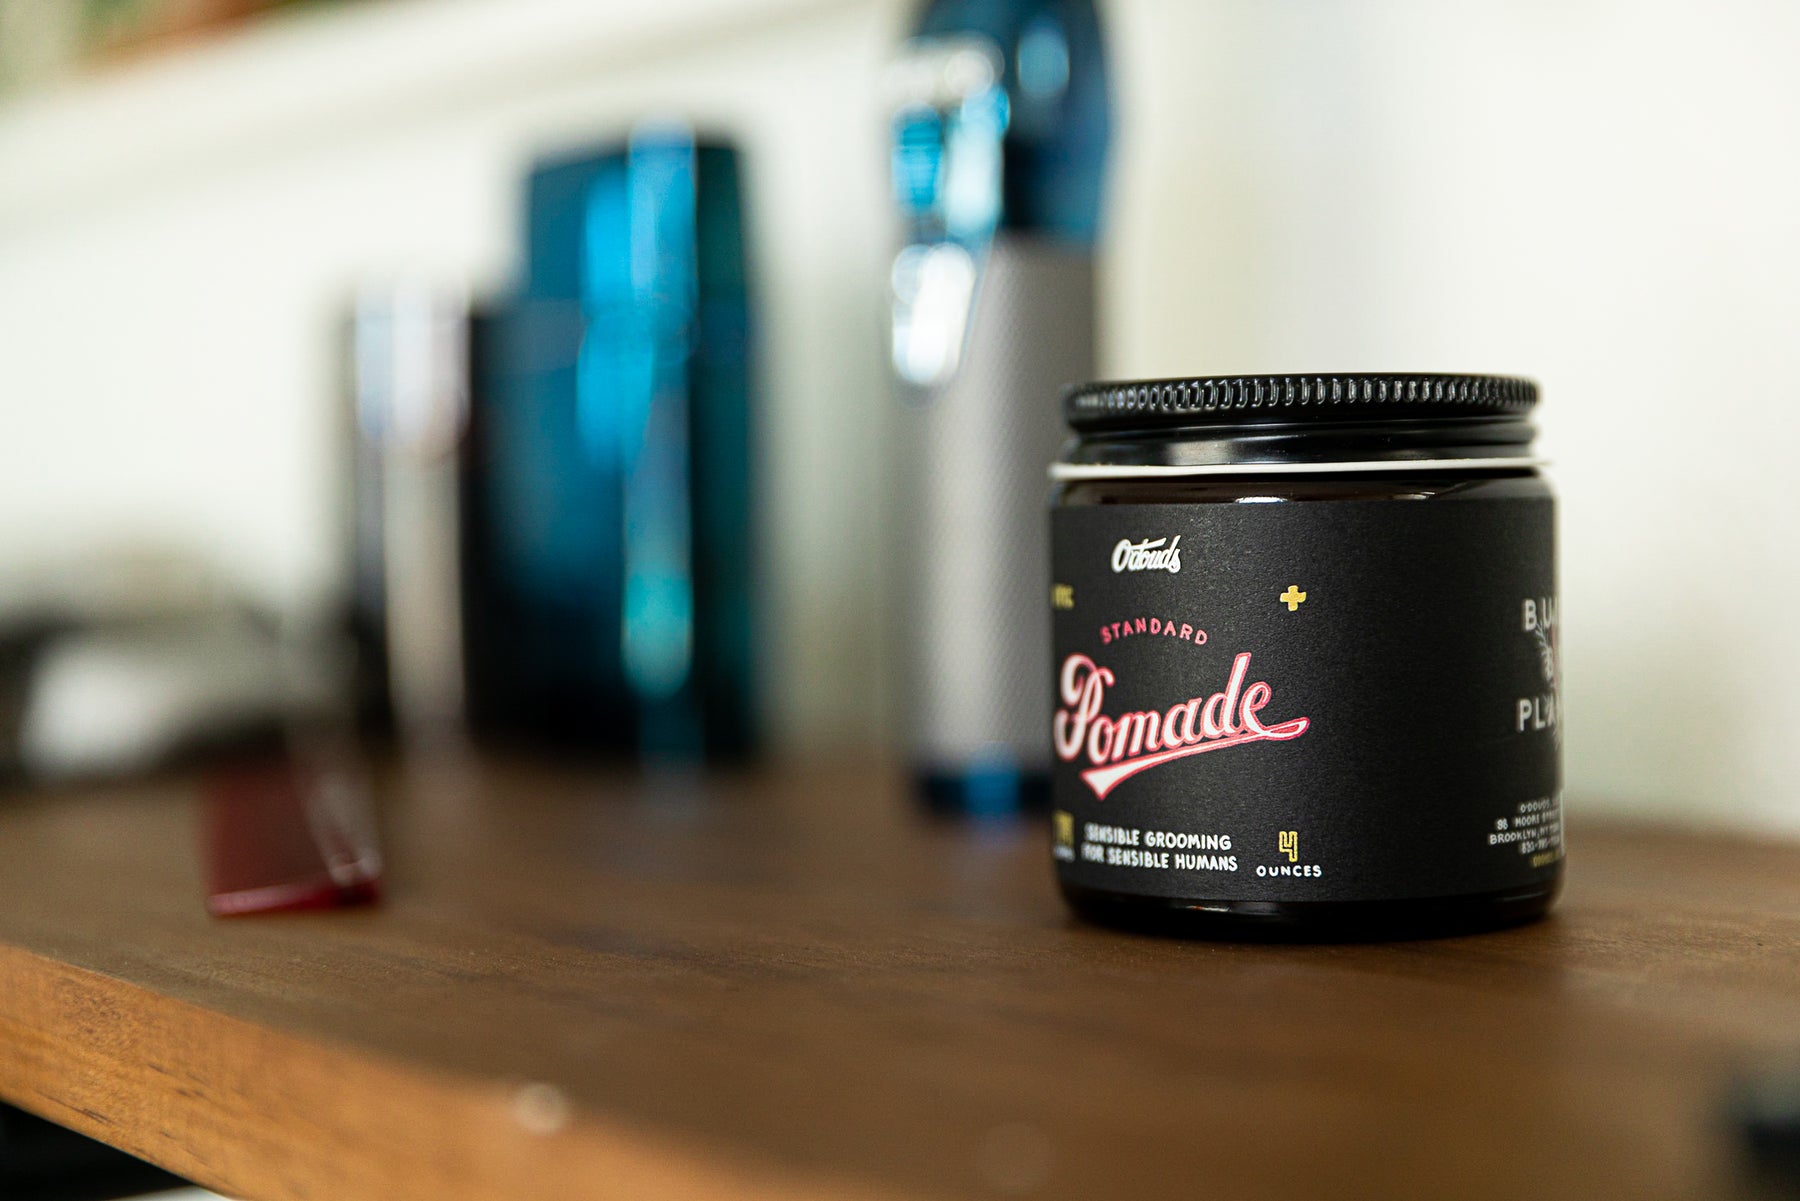 Let's Talk About Standard Pomade!